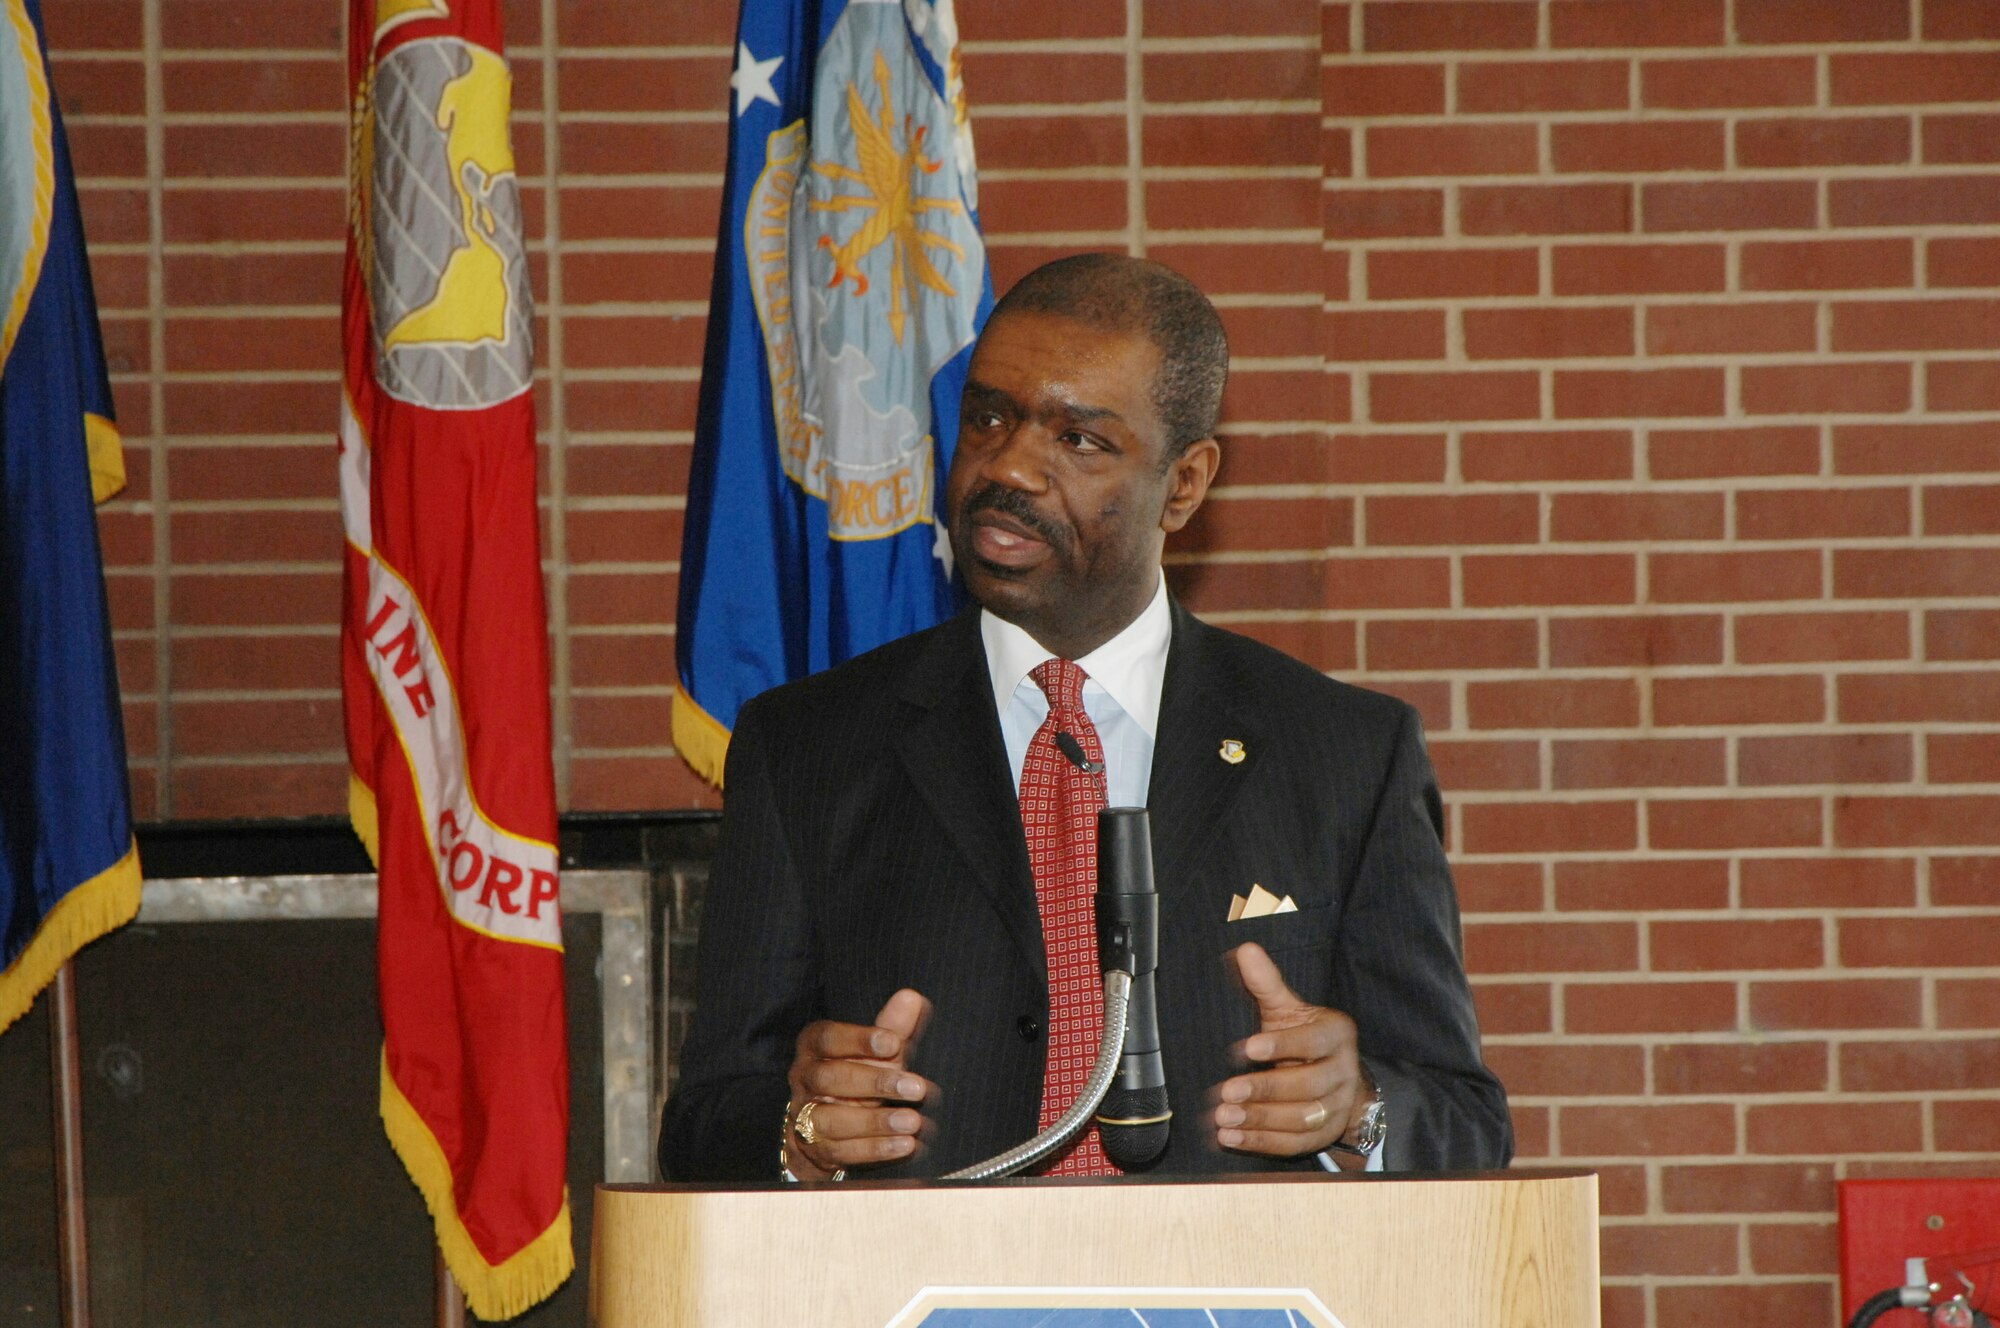 Neville Thompson, a senior engineer in the Office of the Deputy Assistant Secretary of the Air Force (Science, Technology and Engineering), speaks at the African American Heritage Luncheon at Arnold Air Force Base Feb. 23.  He challenged participants to strive to make a difference in the lives of young people by encouragement, mentoring and other acts of service. (Photo by David Housch)